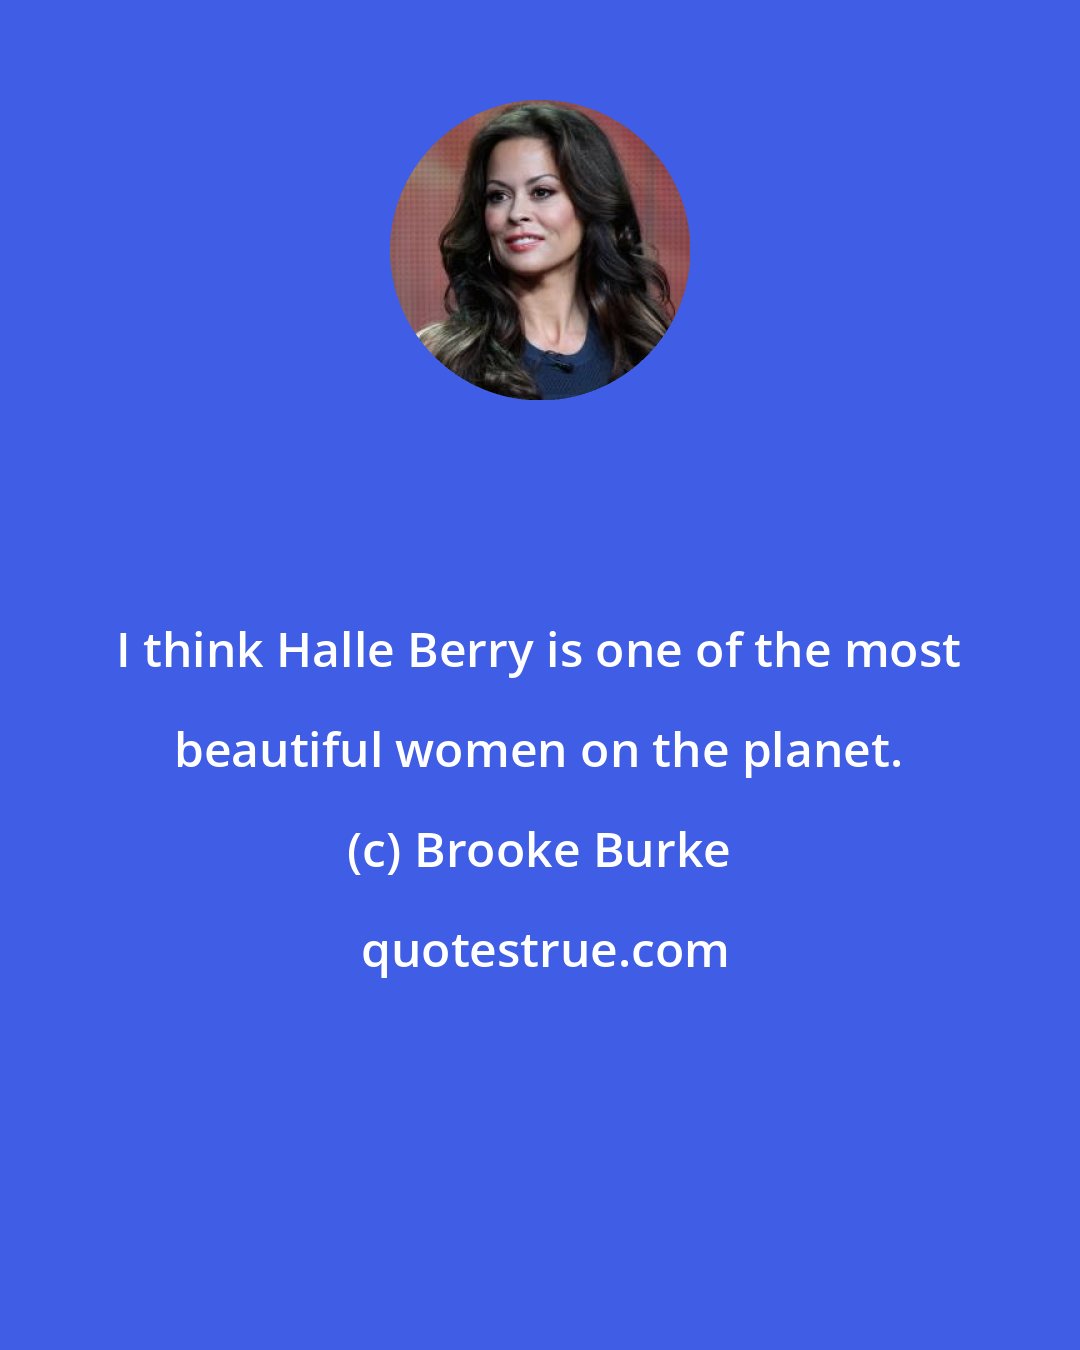 Brooke Burke: I think Halle Berry is one of the most beautiful women on the planet.